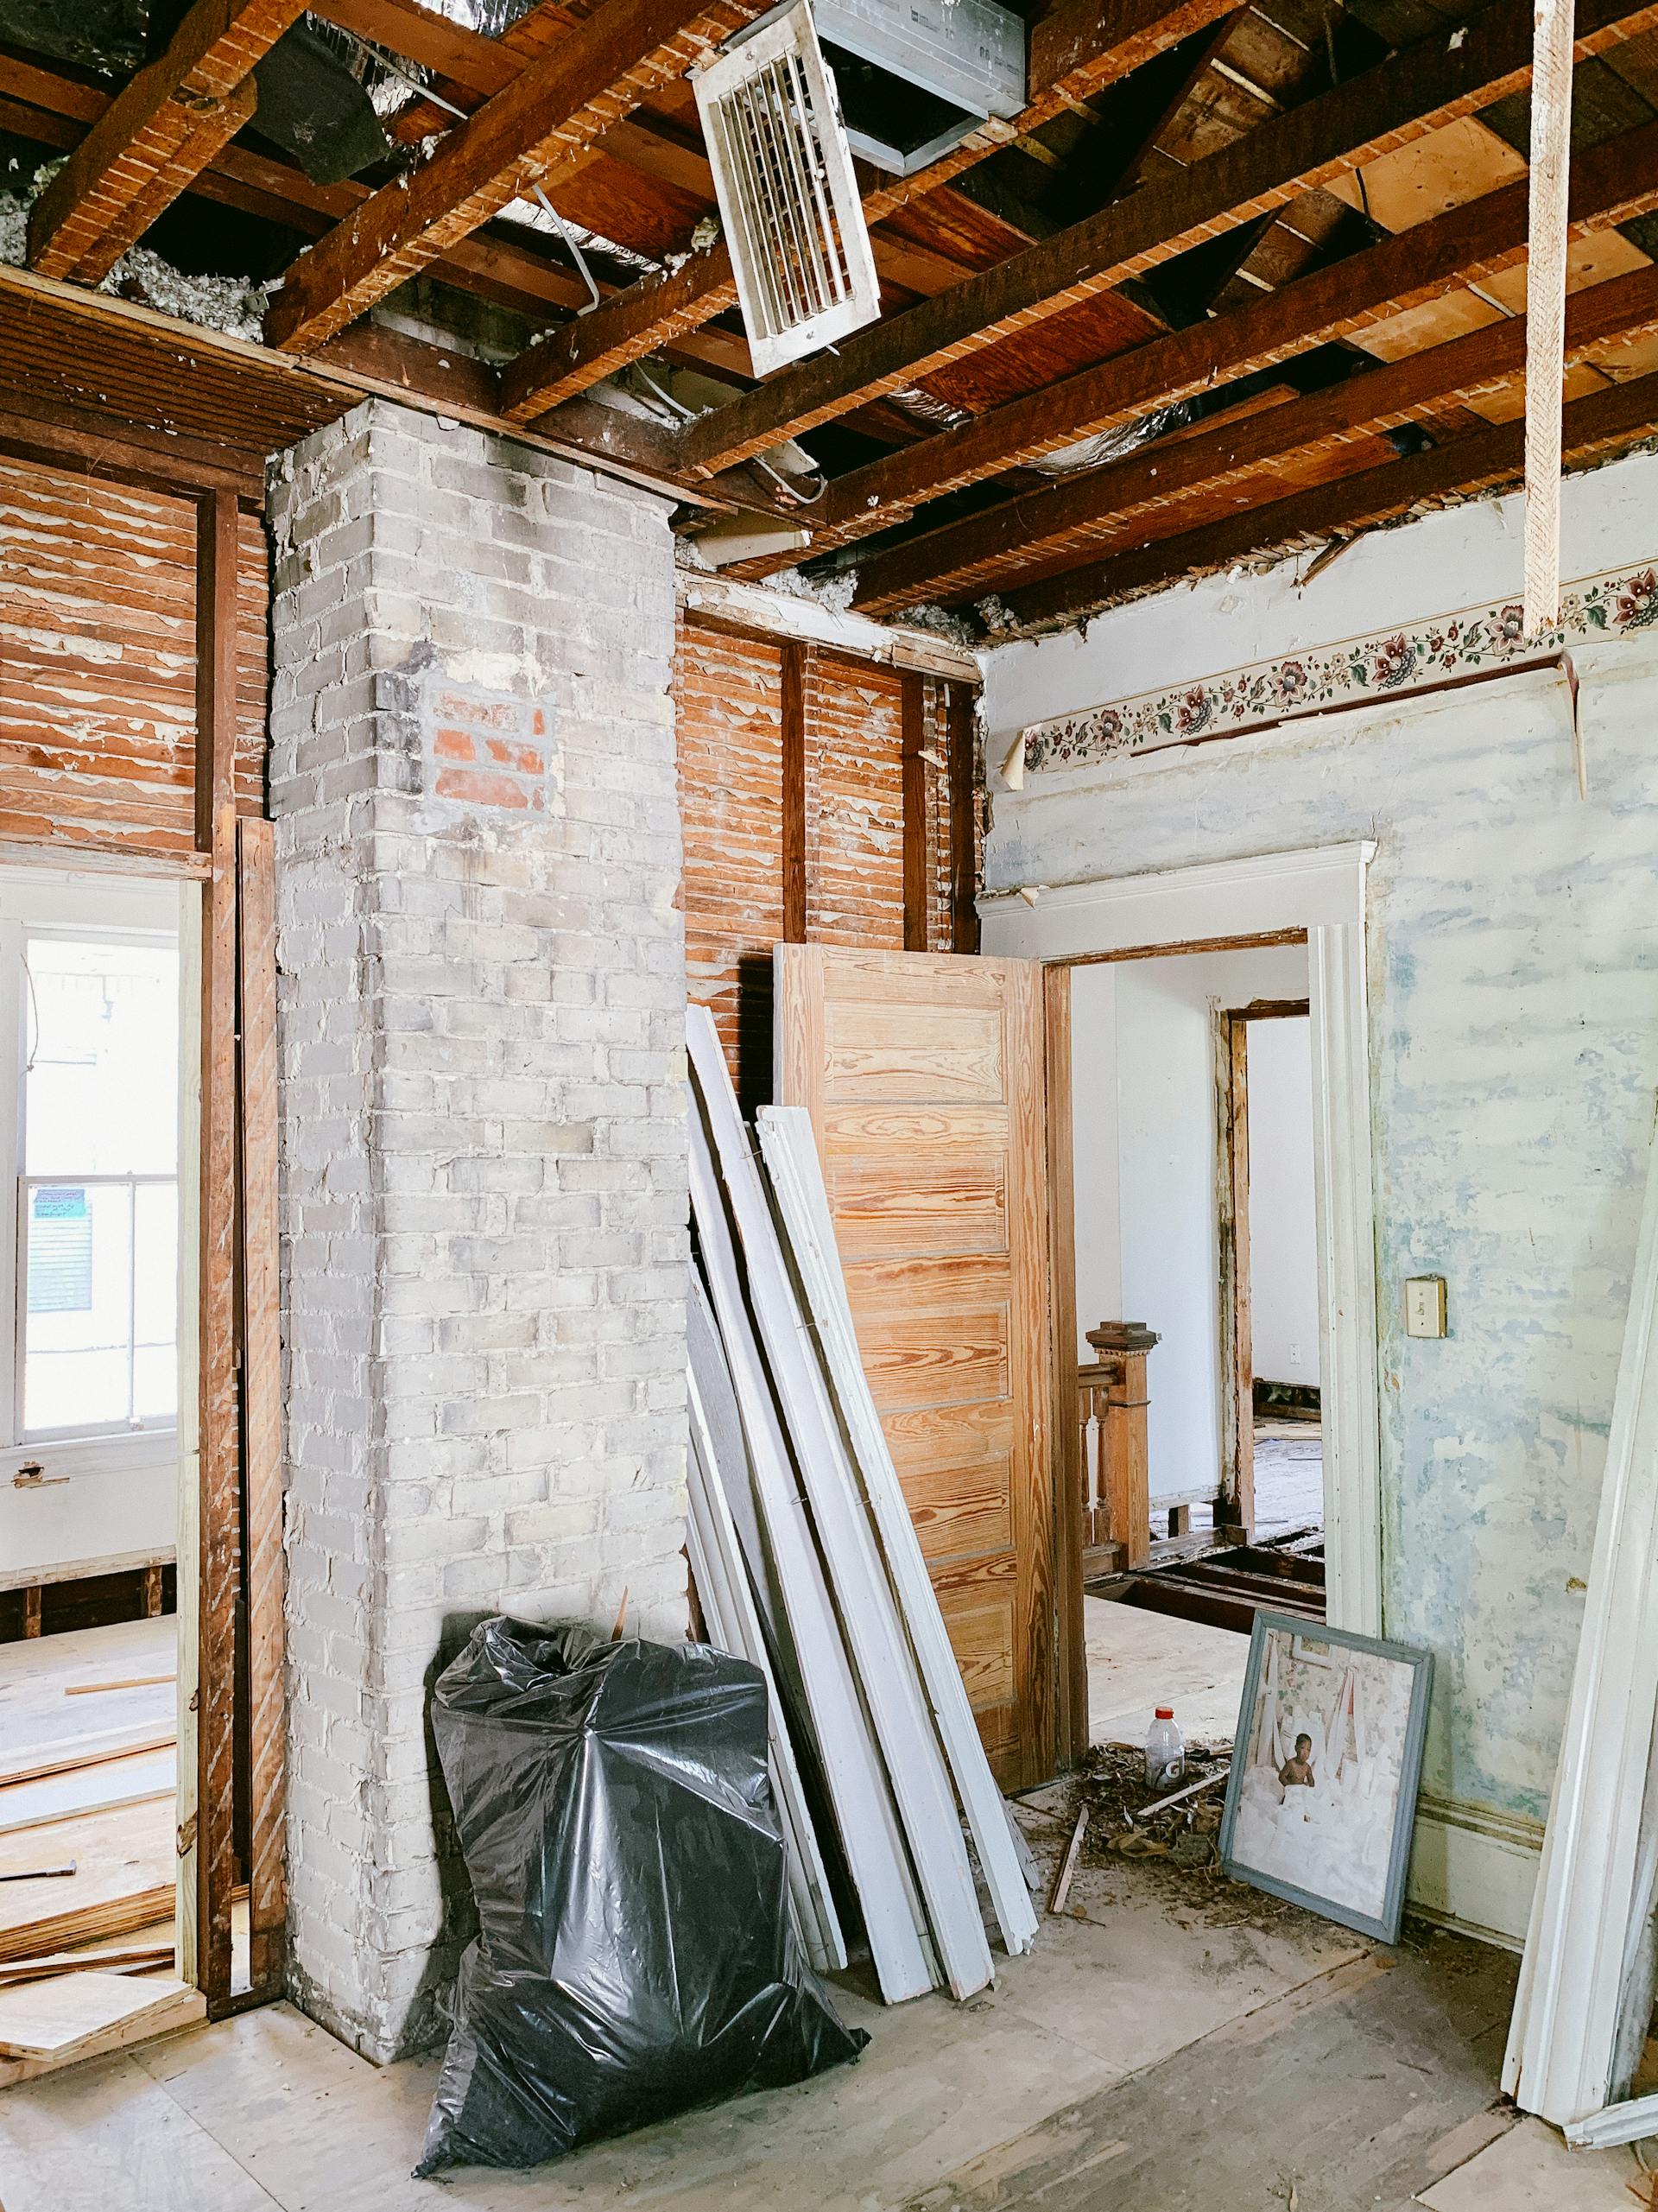 A house being renovated | Source: Pexels